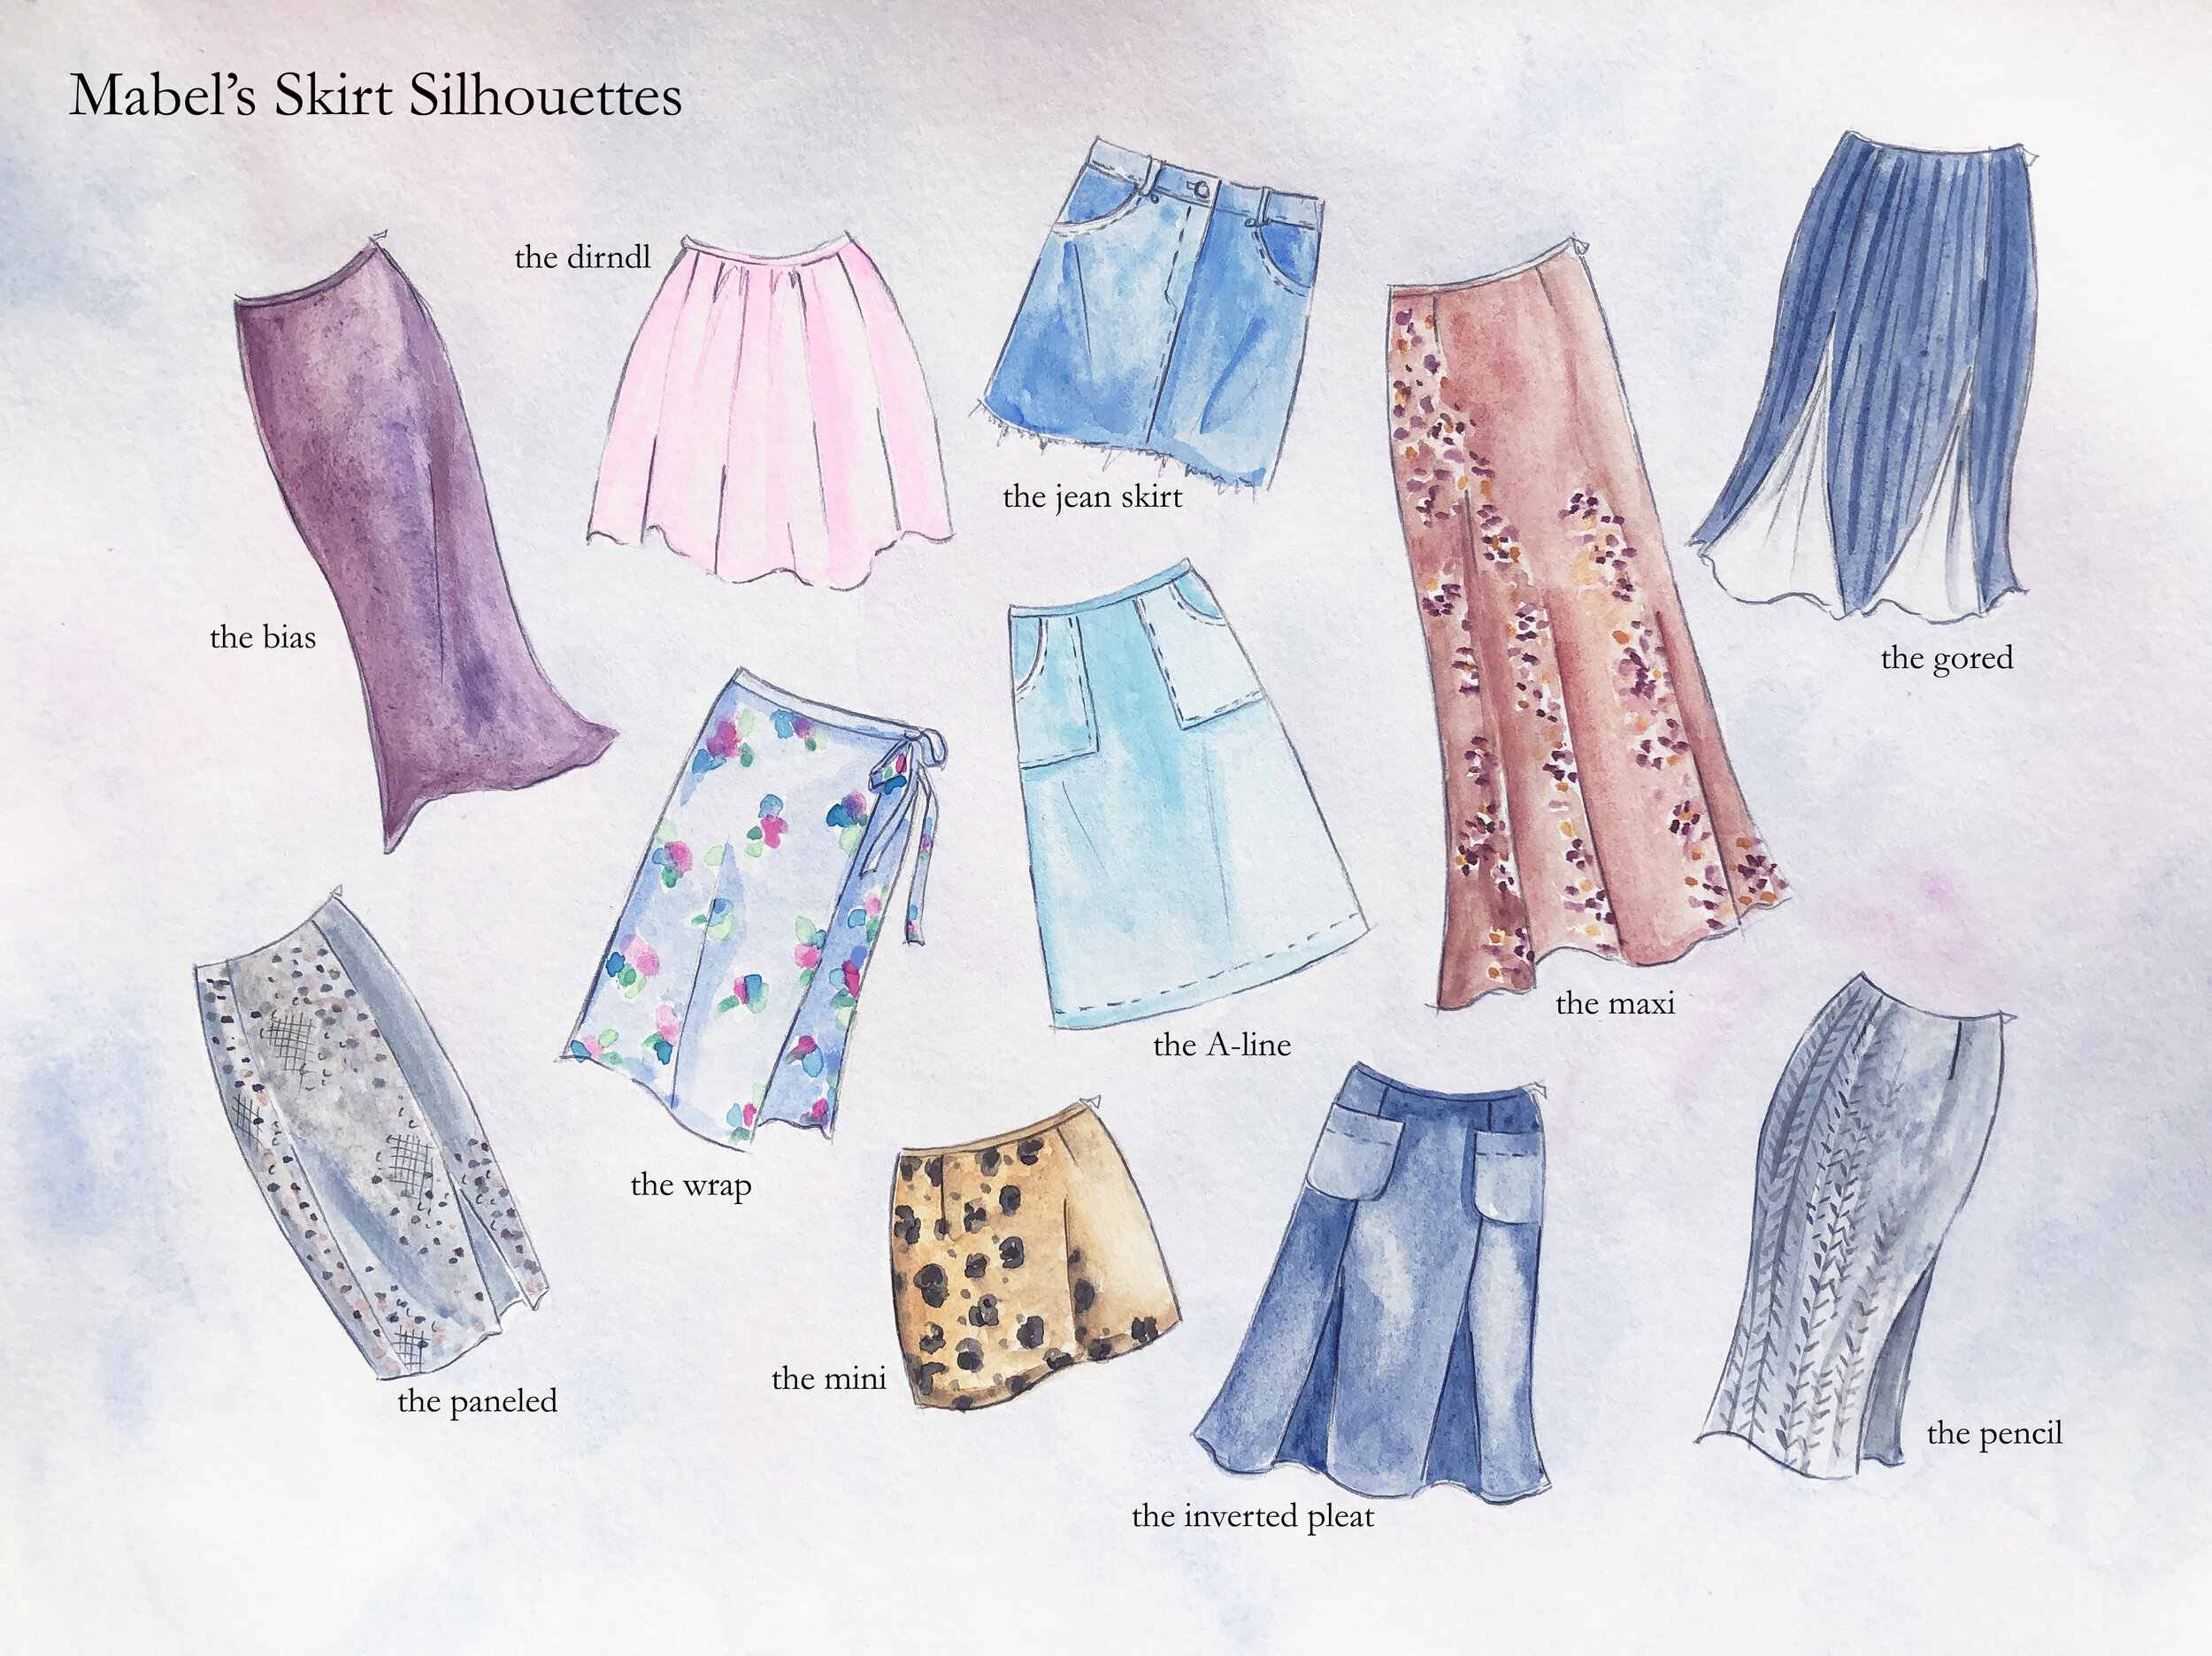 Silhouette in Fashion Design: Definition, Types & History - Textile Learner